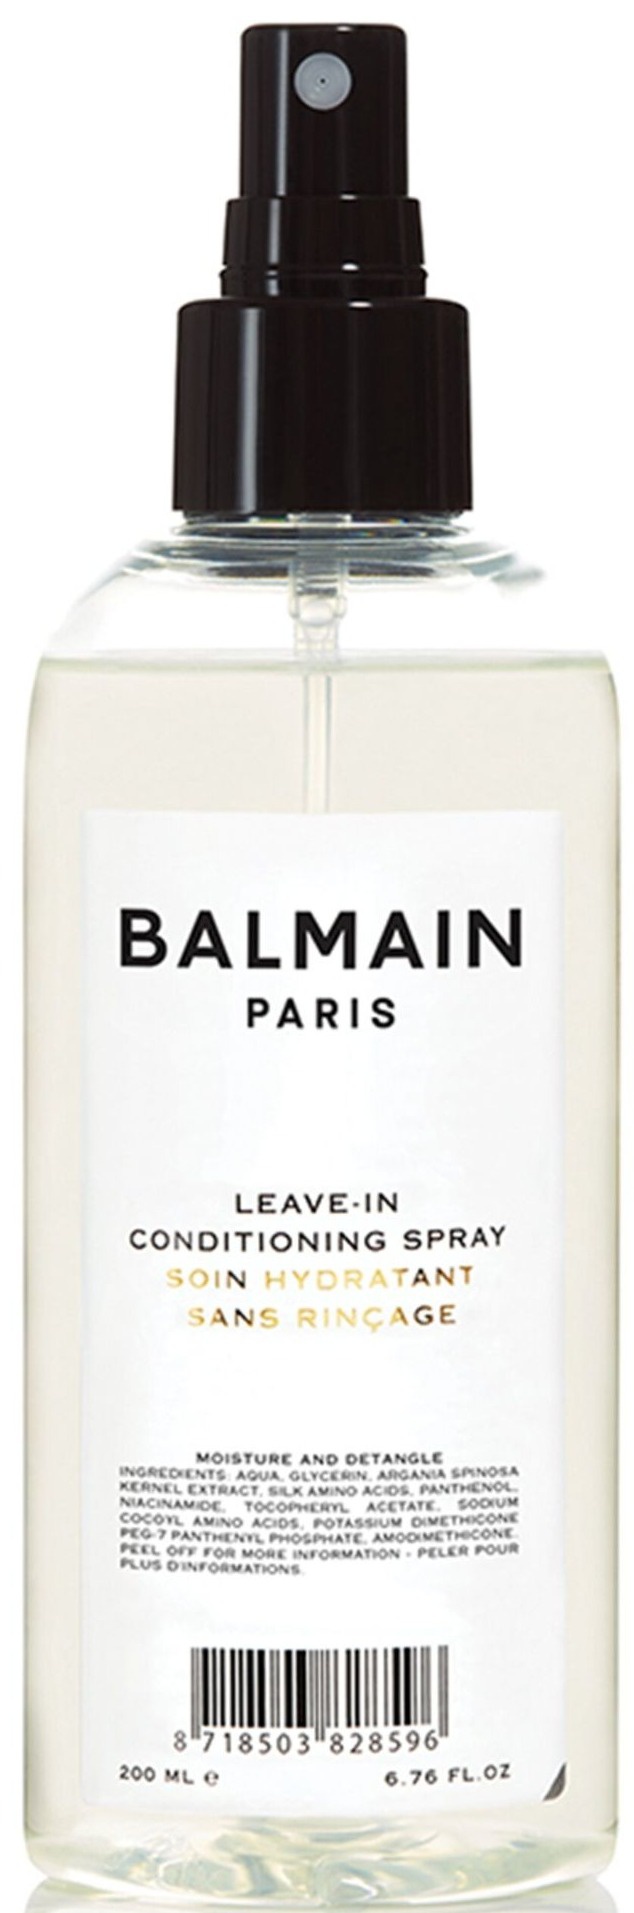 Balmain Hair Couture Leave-in Conditioning Spray ingredients (Explained)